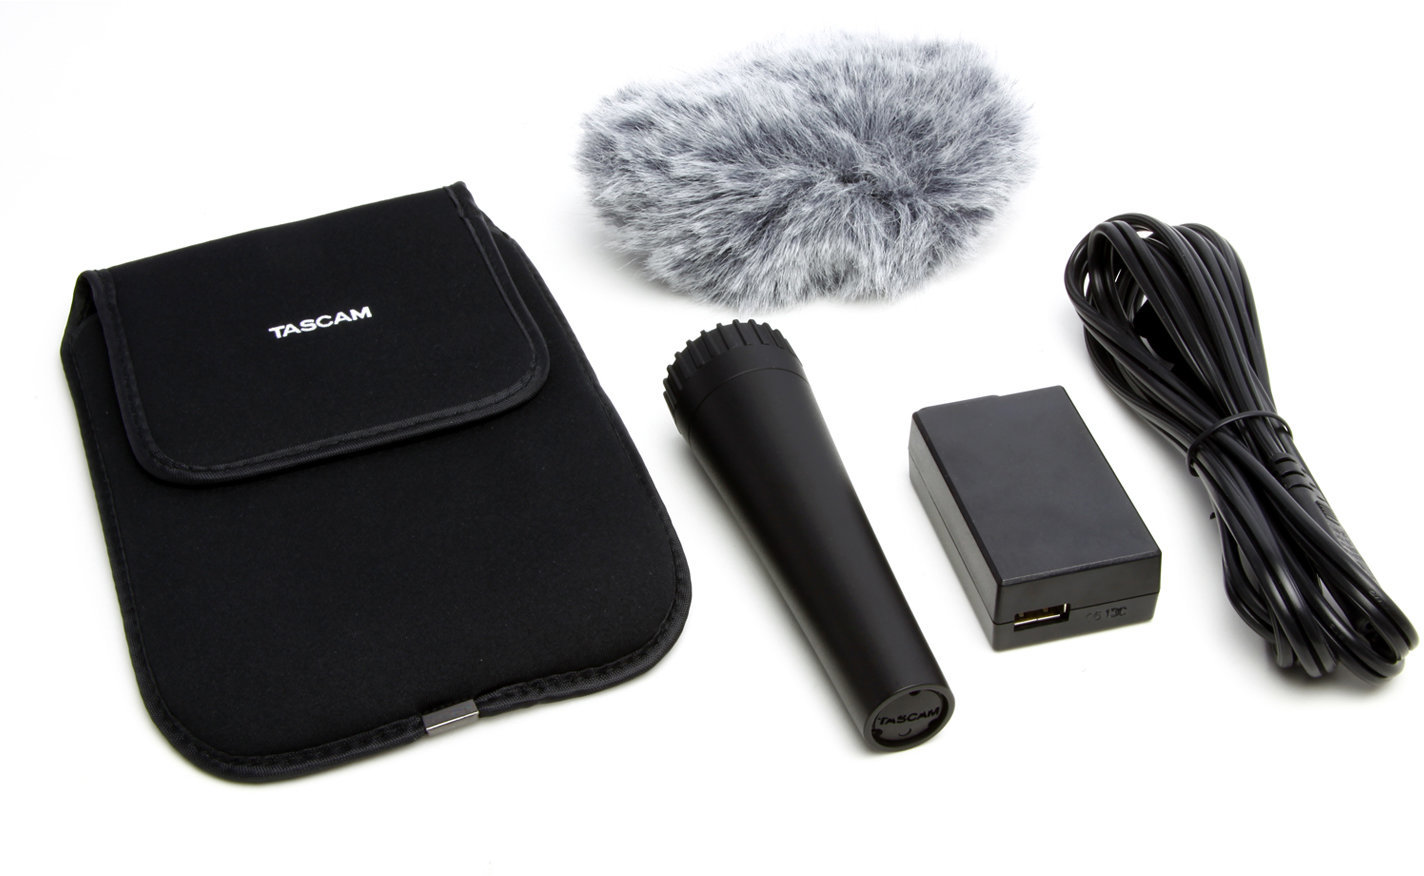 Accessory kit for digital recorders Tascam AK-DR11G